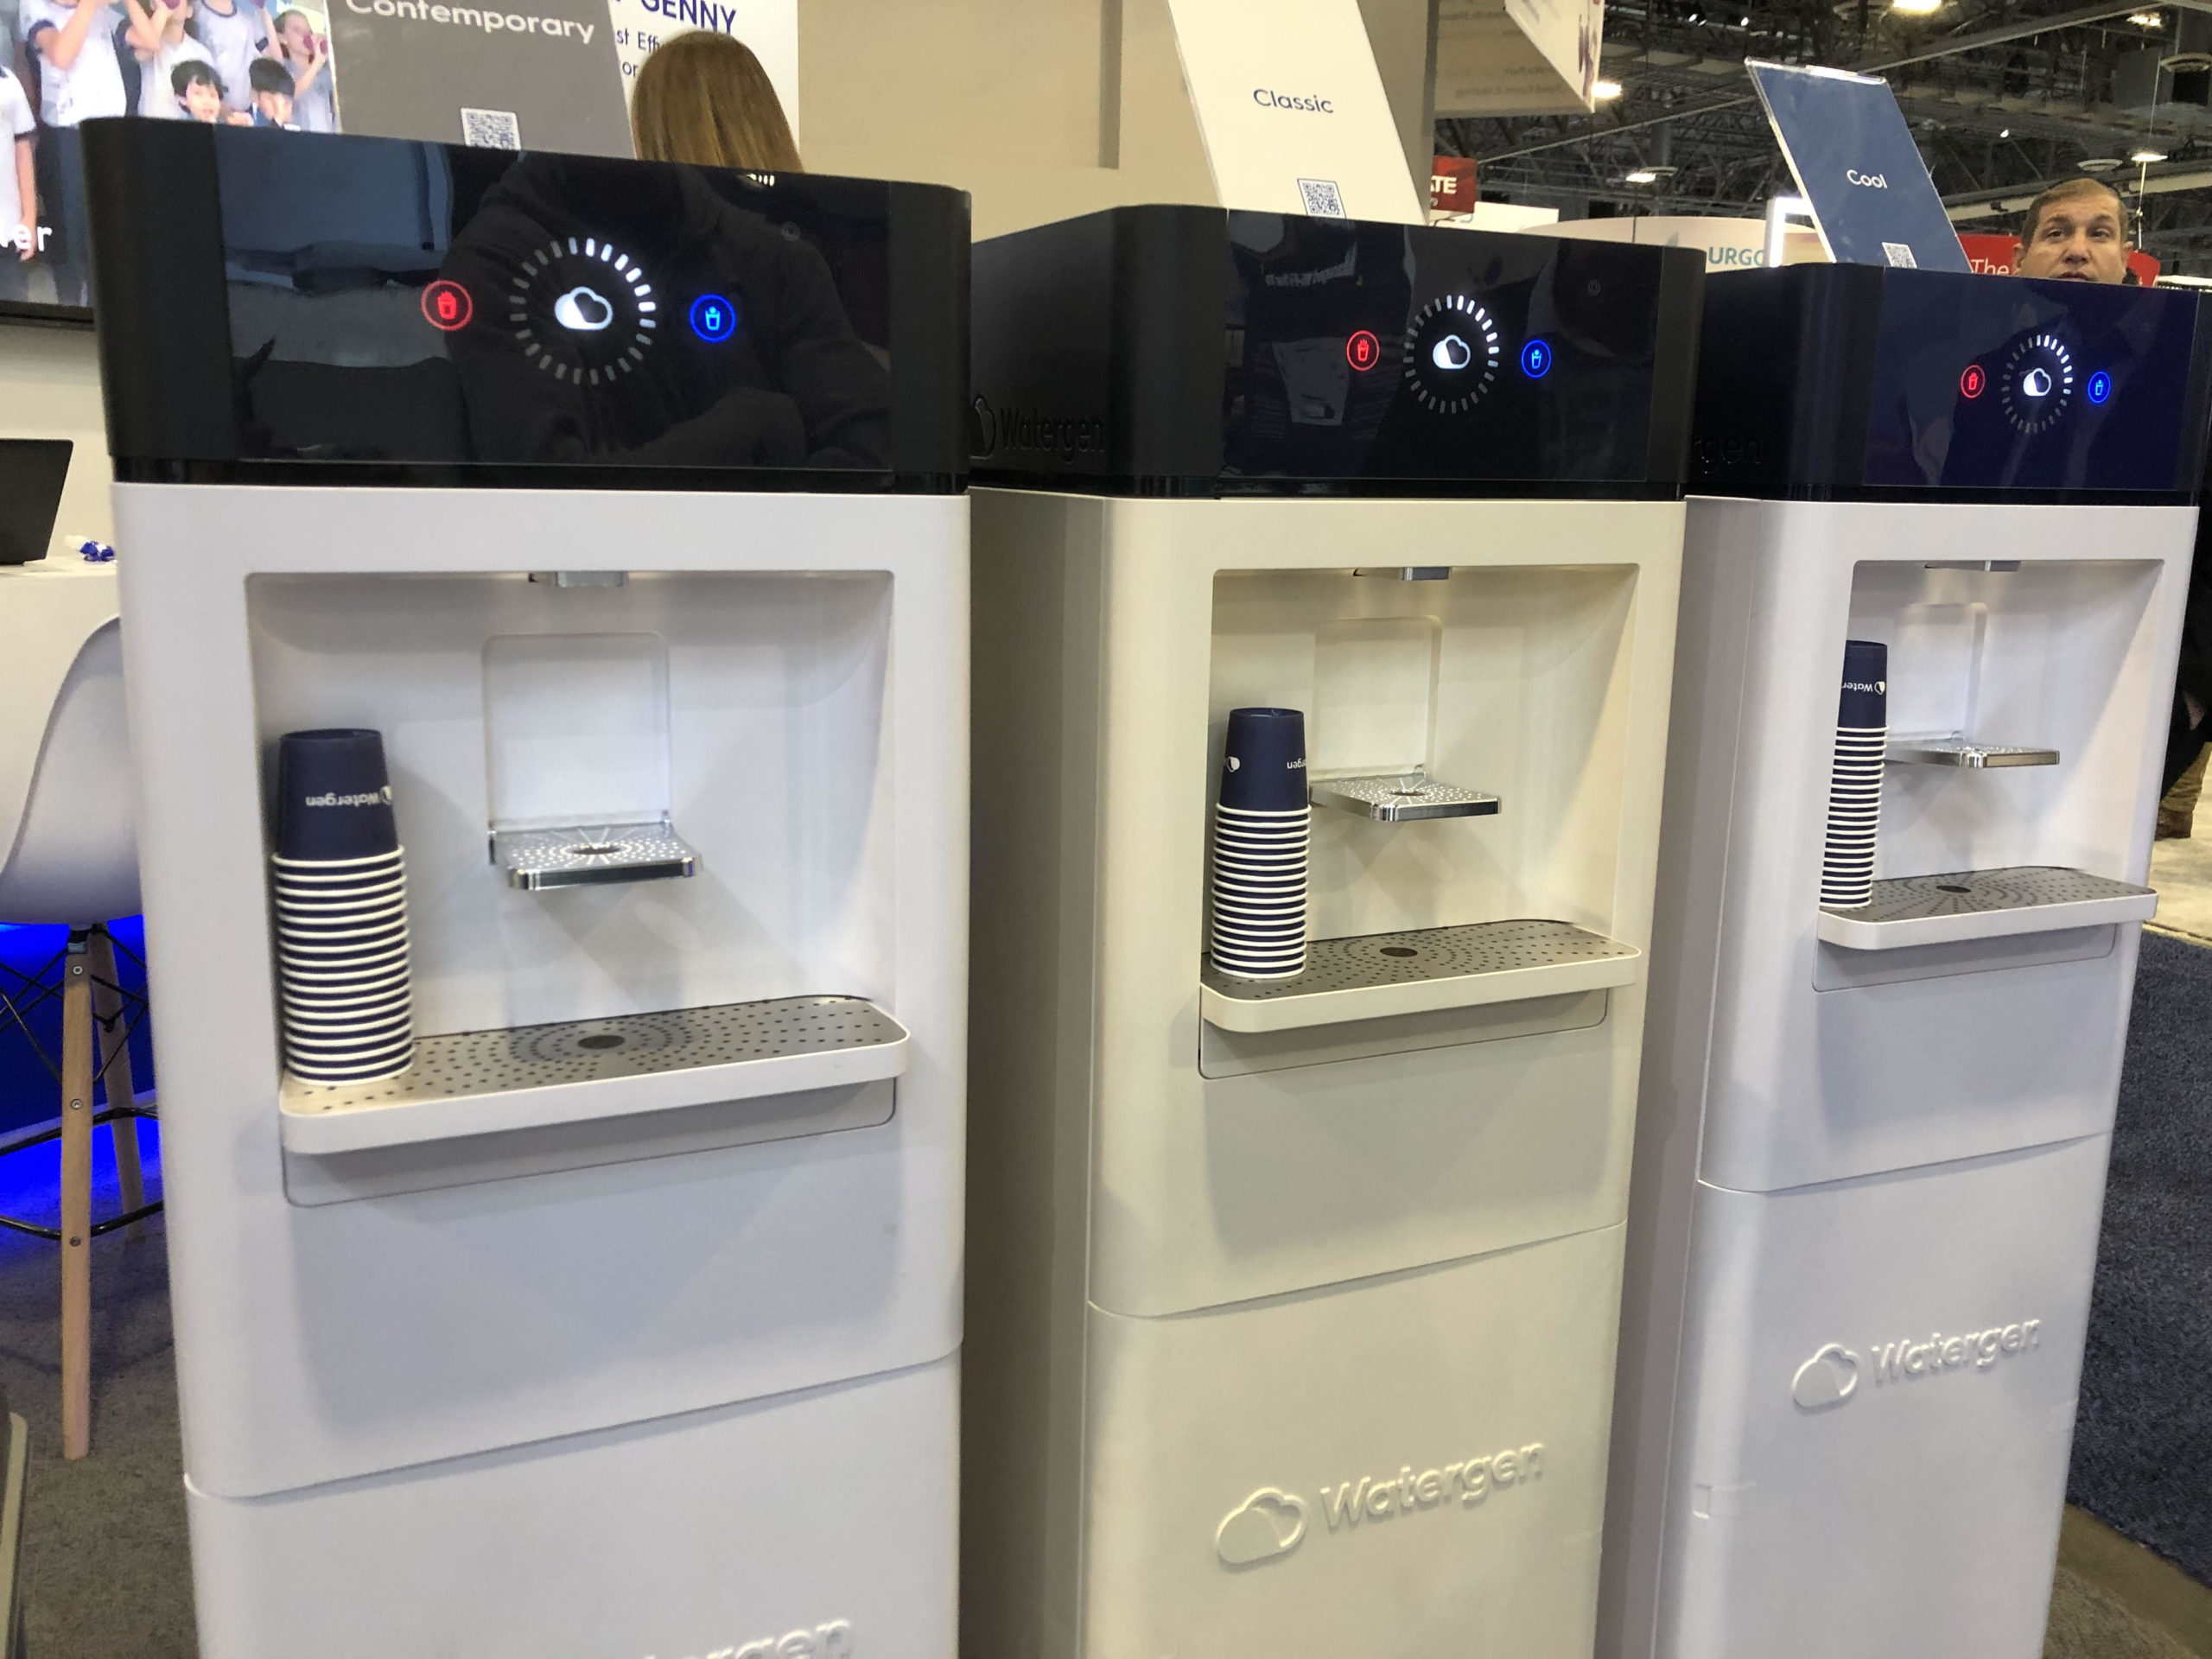 CES 2020: Watergen Wants to Replace the Water Cooler by Making H20 from Air - The Spoon